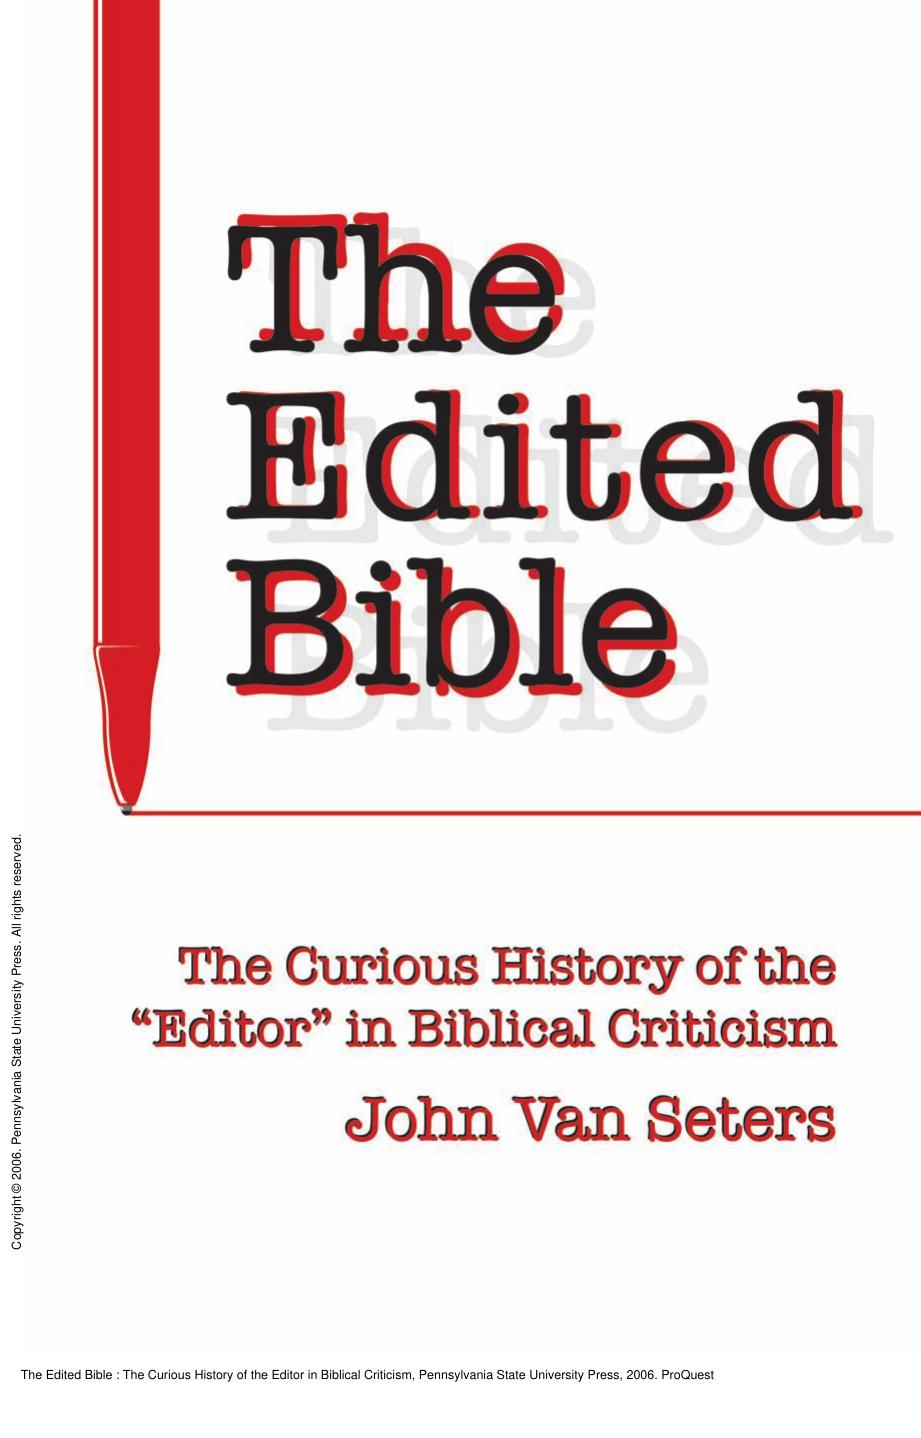 The Edited Bible : The Curious History of the Editor in Biblical Criticism by John Van Seters